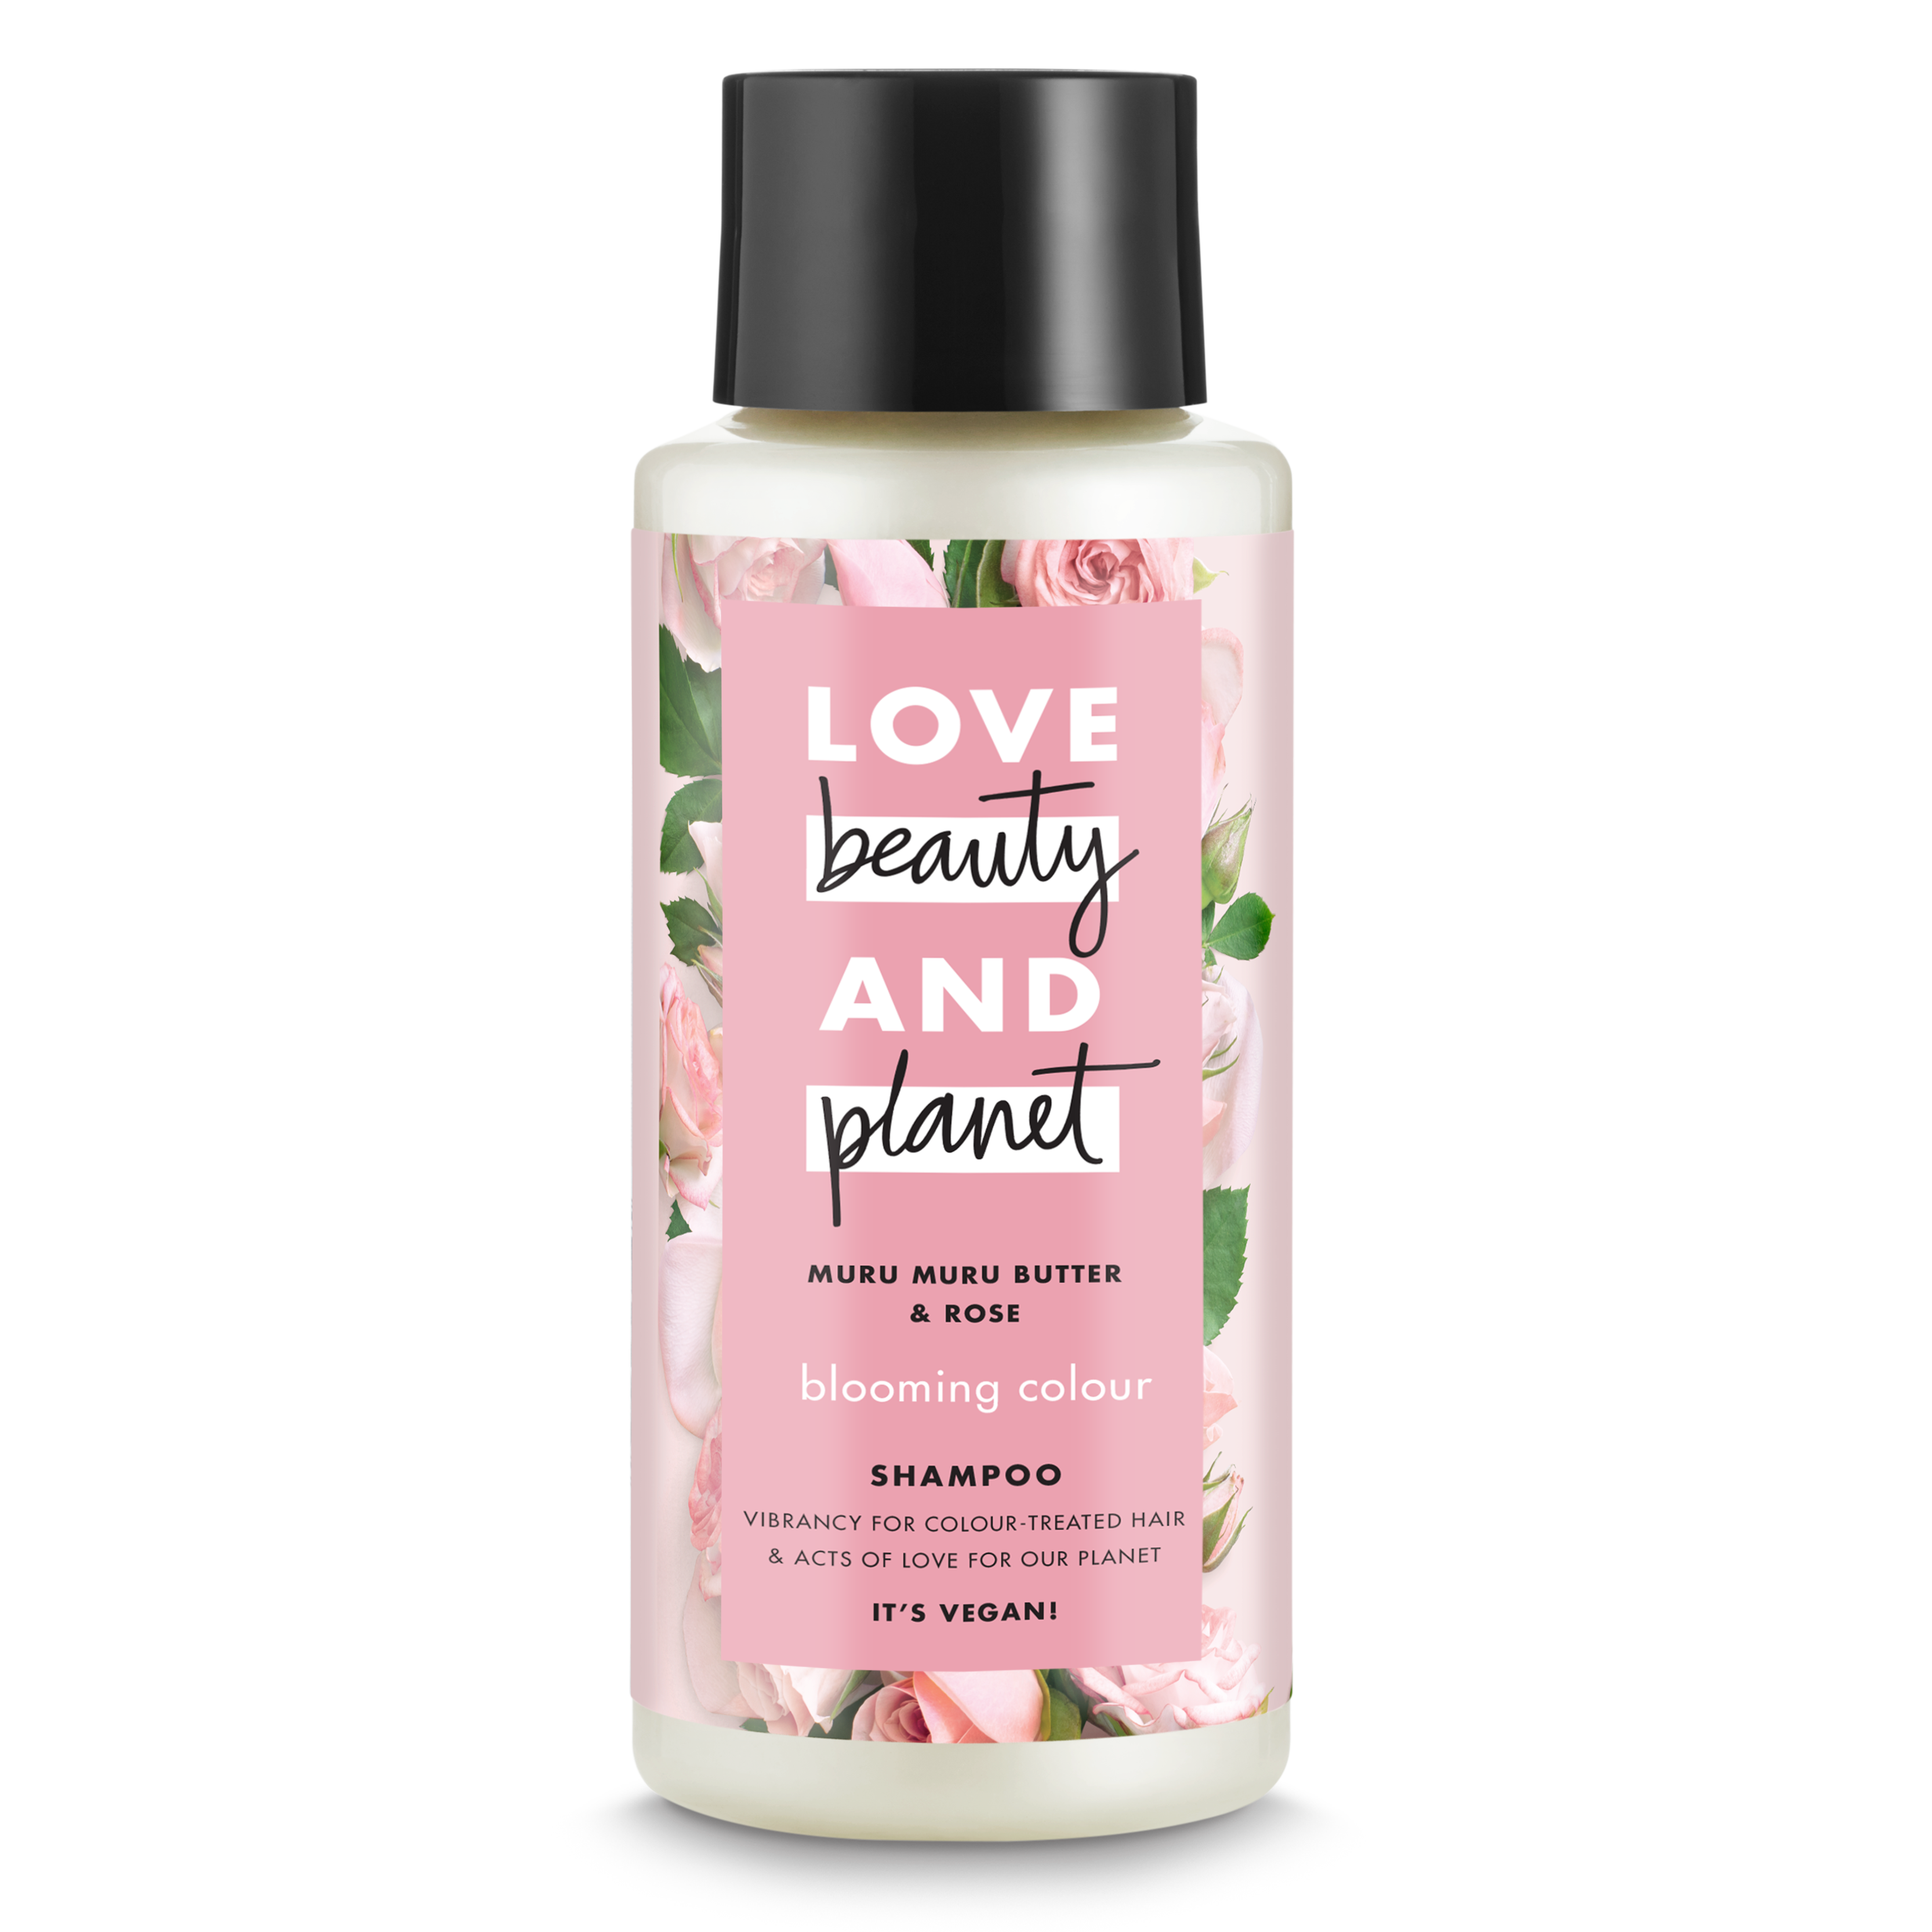 szampon love beauty and planet opinie